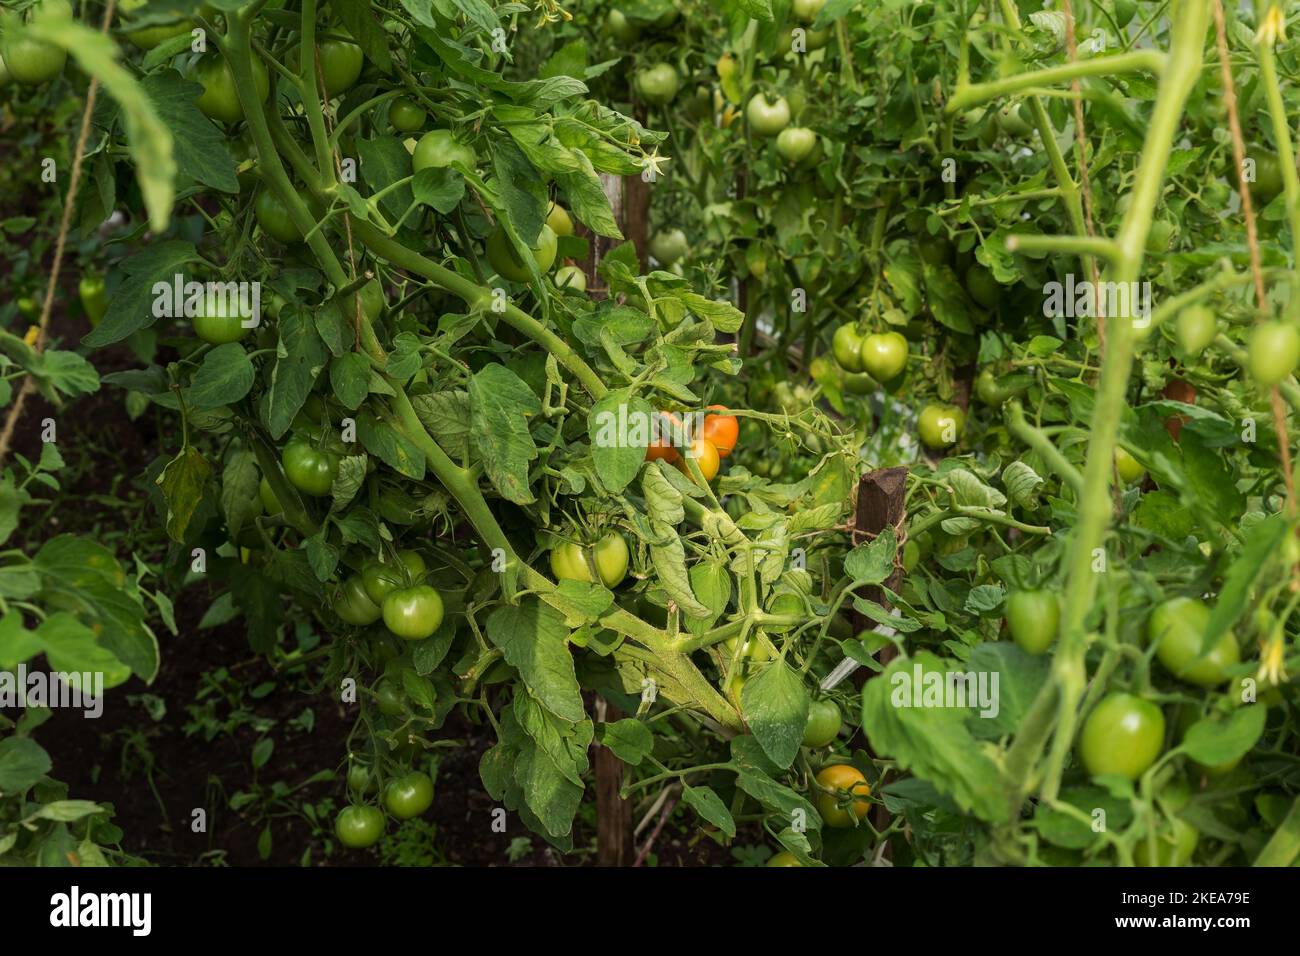 green tomatoes growing in a greenhouse. tomato hanging on a branch. tomatoes plantation. Organic farming Stock Photo